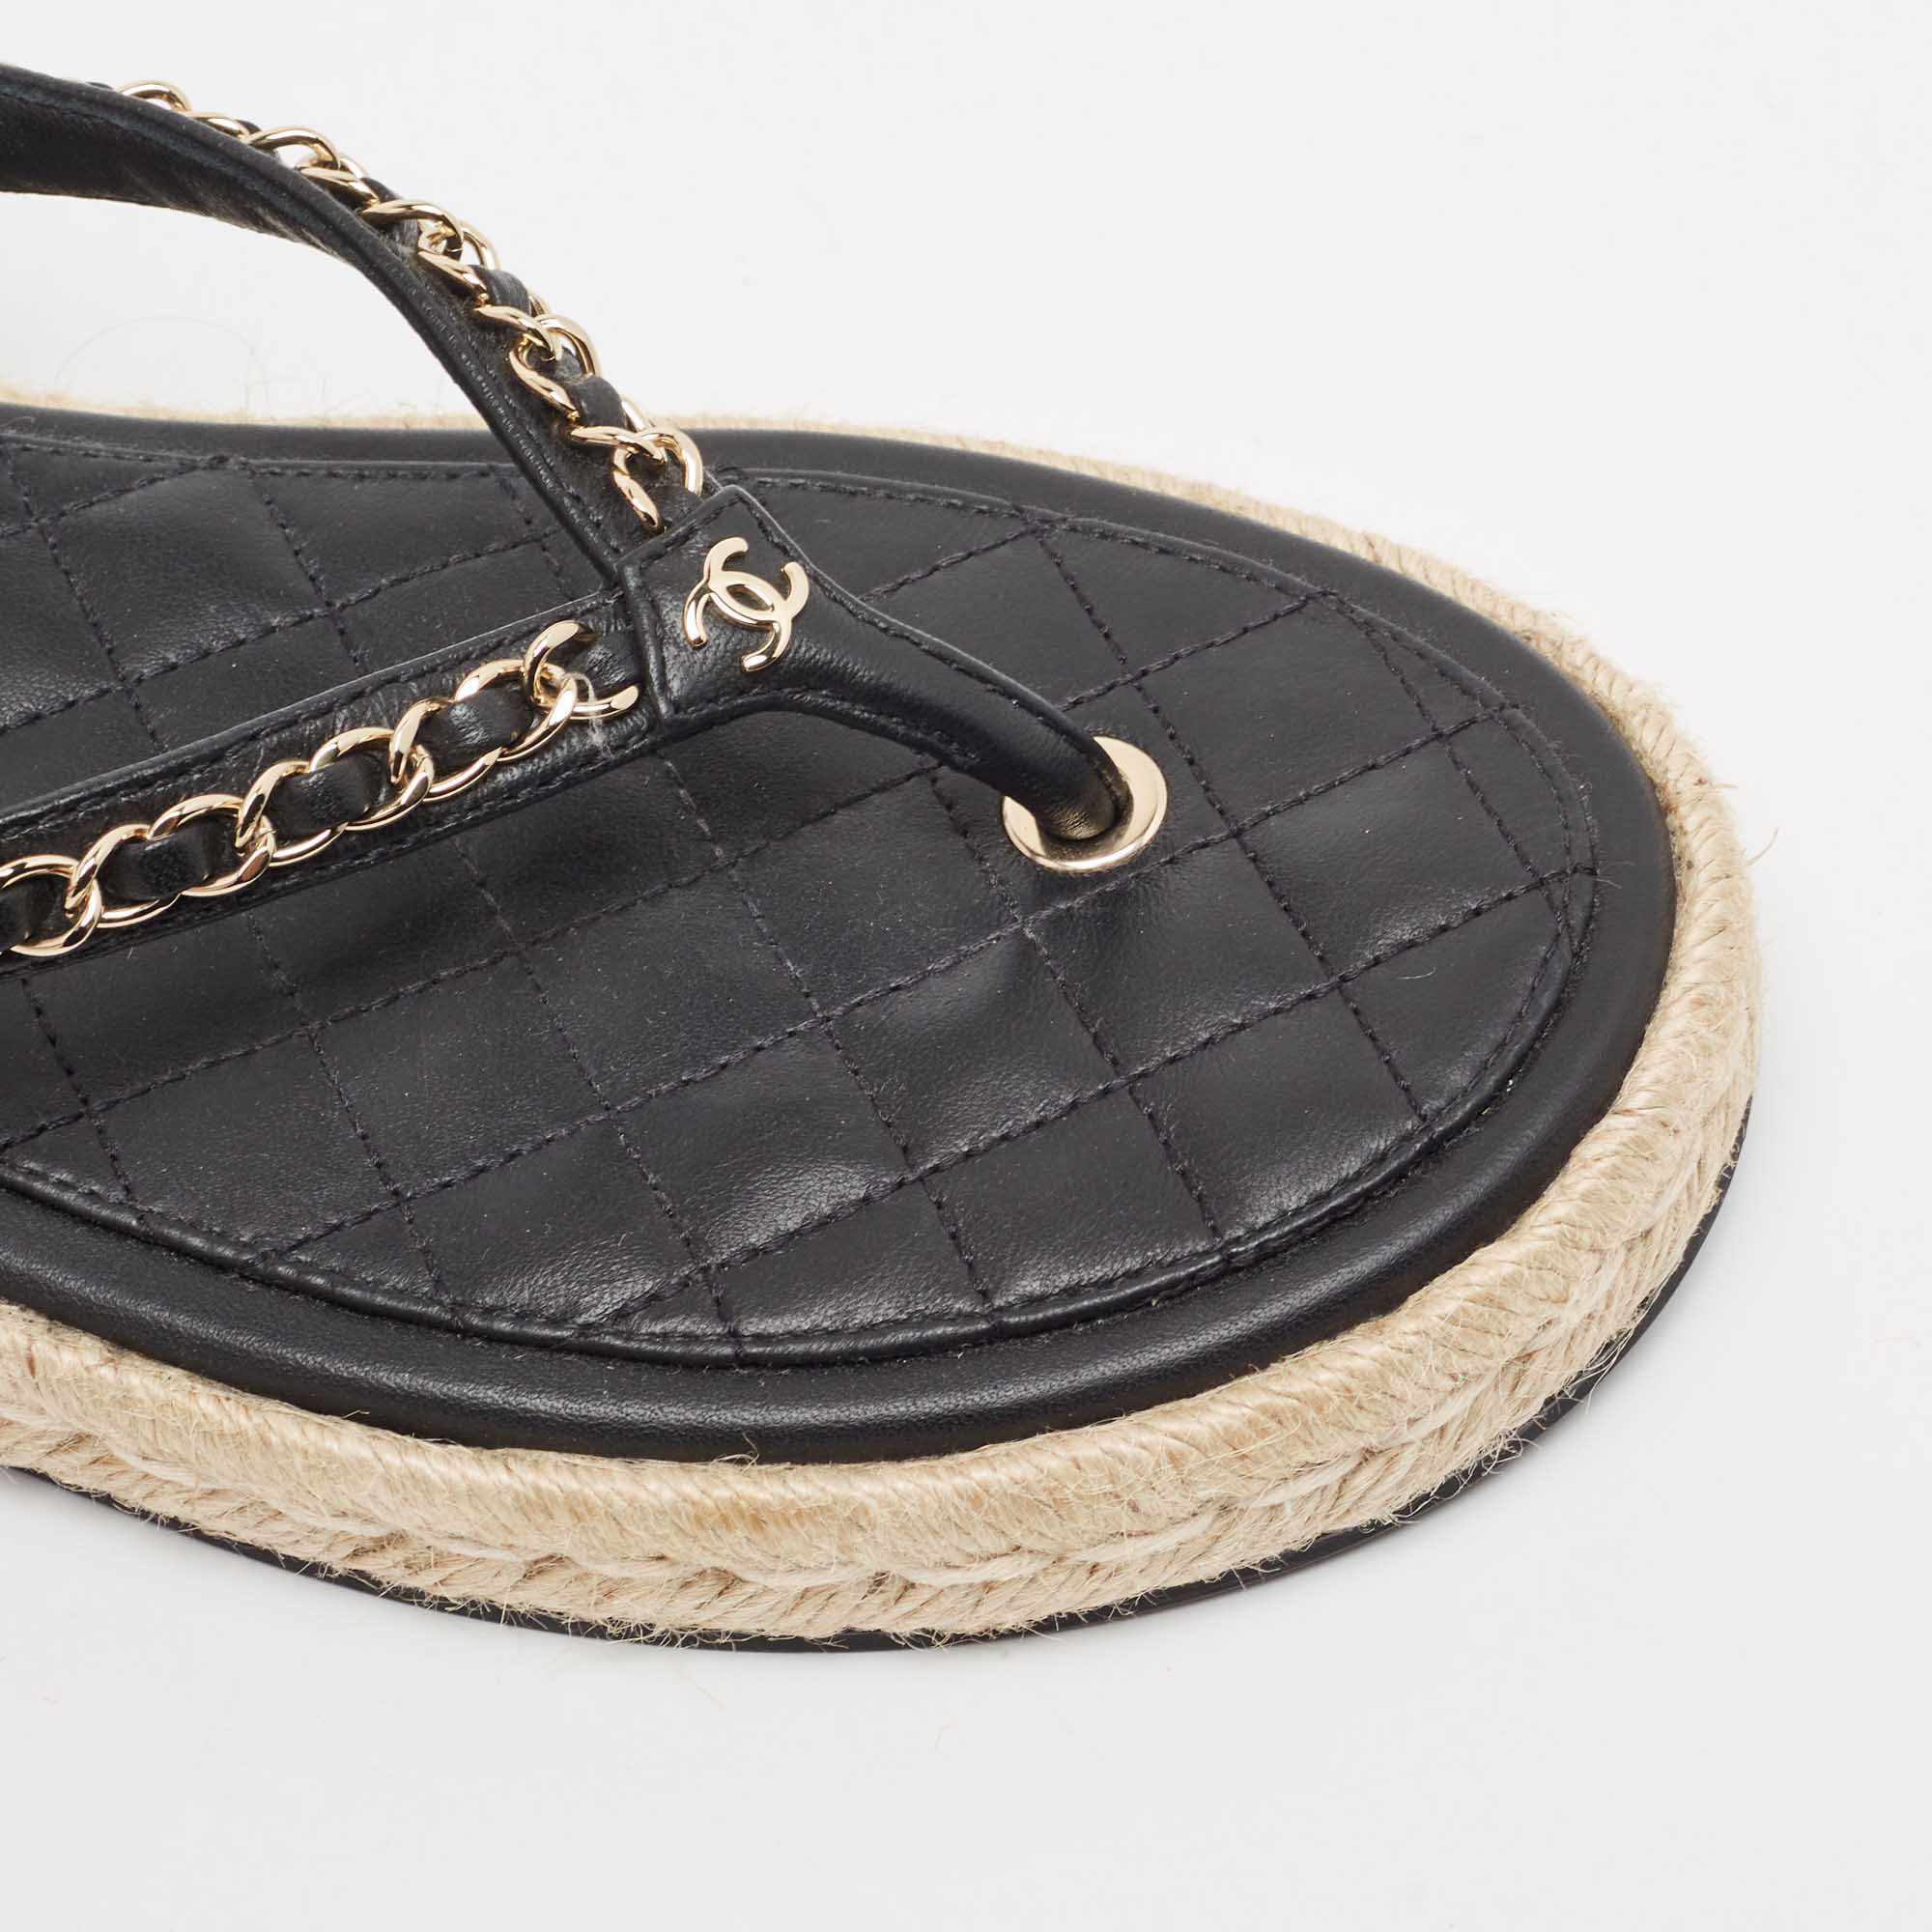 Chanel Black Leather Chain Link CC Espadrille Ankle Strap Thong Sandals Size 41